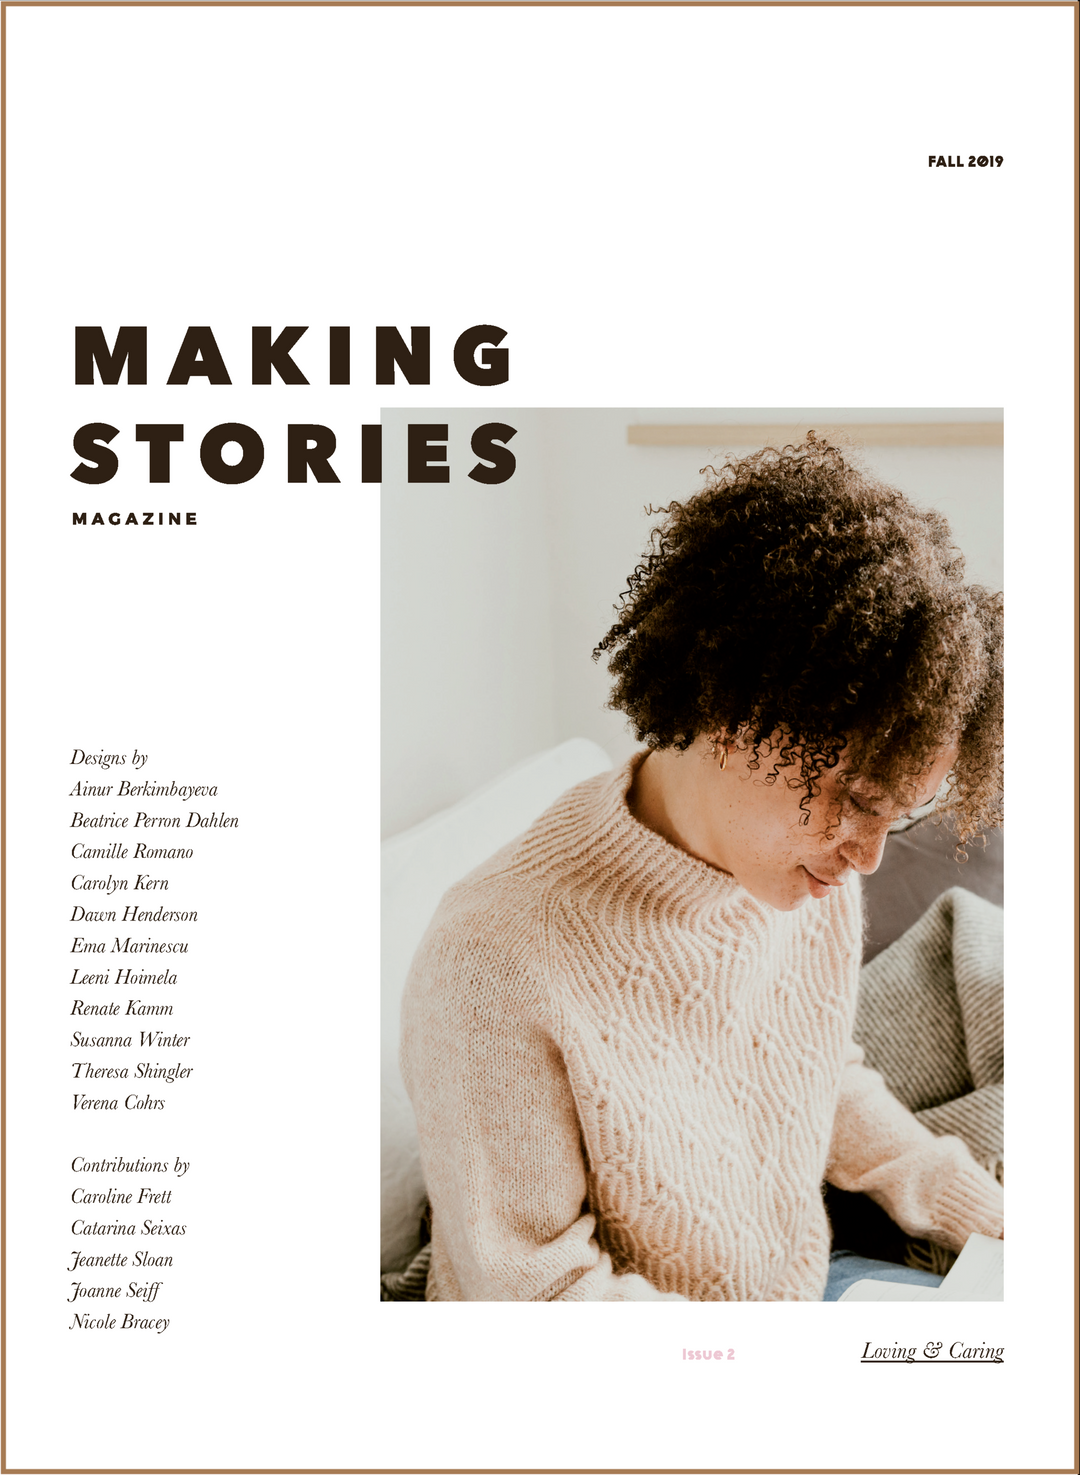 The cover of Making Stories magazine, featuring a brown-skinned woman with brown curly hair wearing a cream sweater.